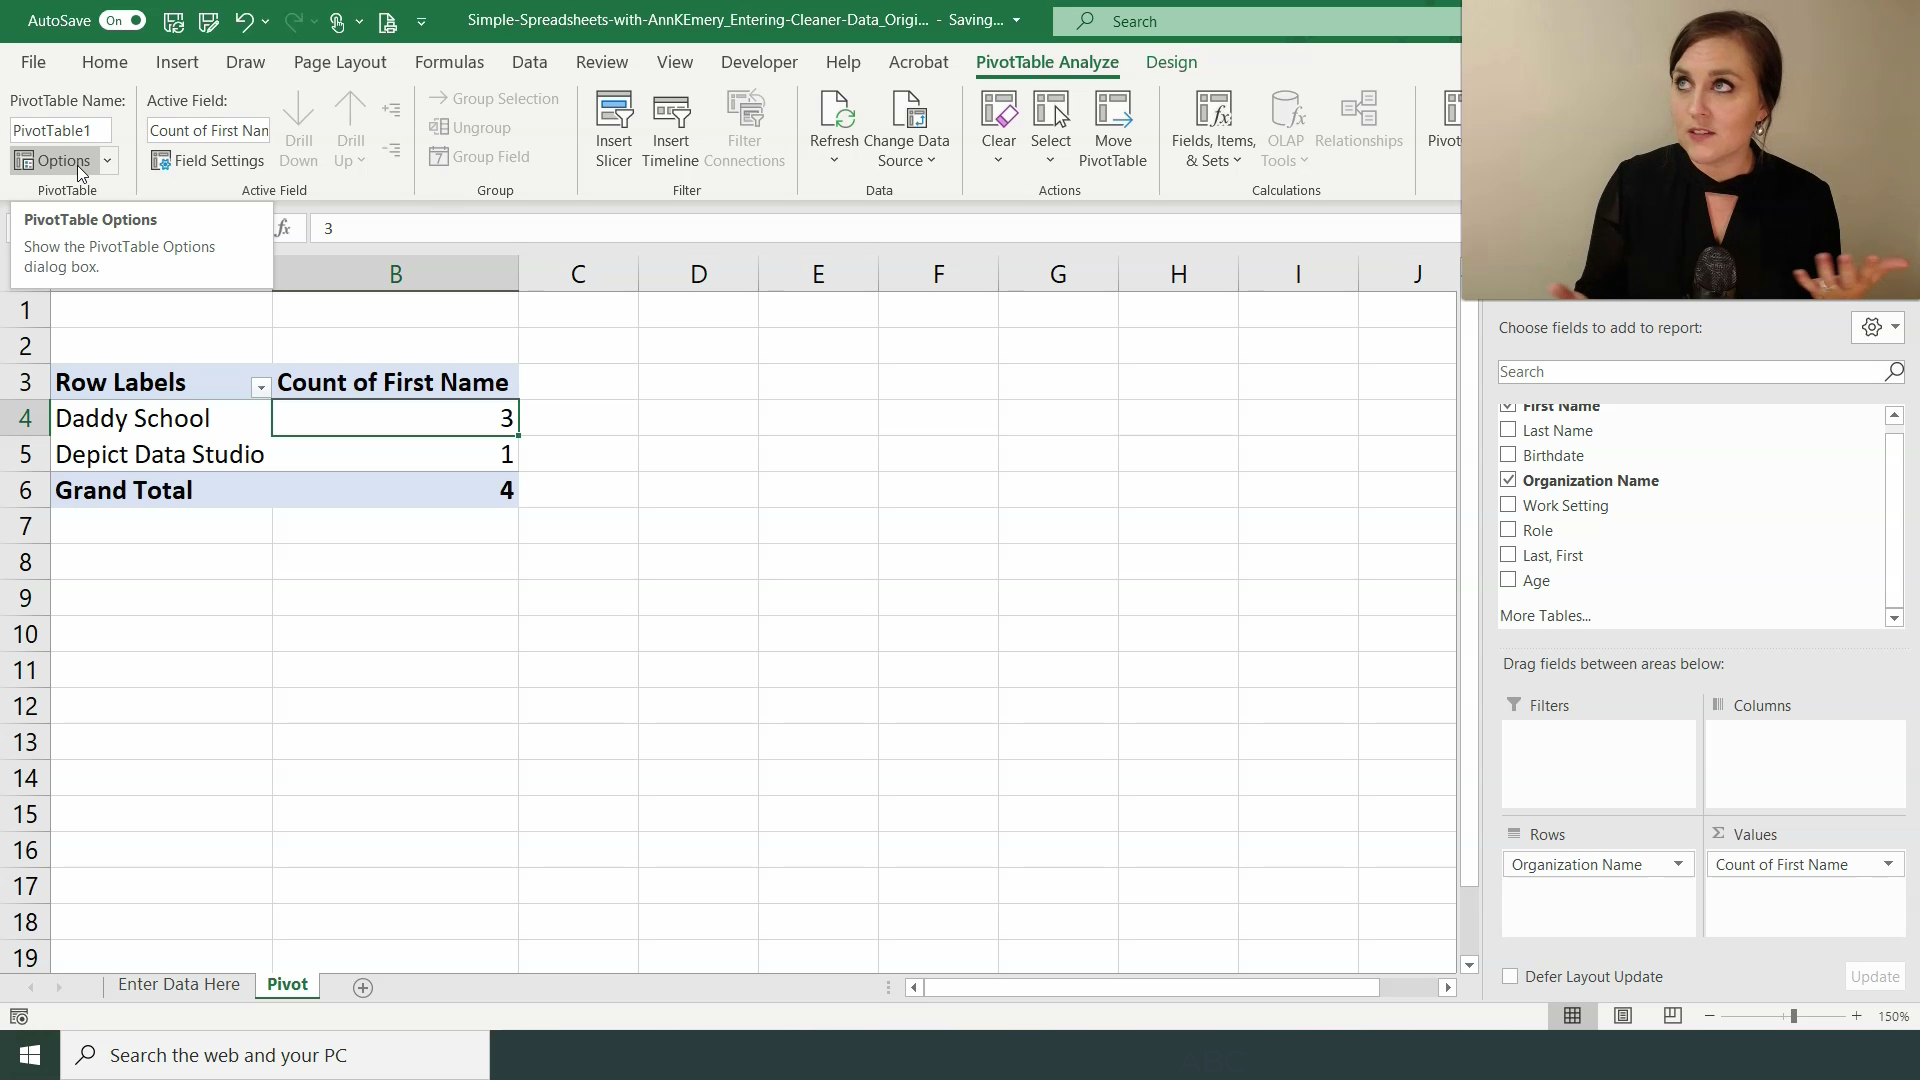 Step 7. Pre-Summarize the Data with Pivot Tables and/or Formulas